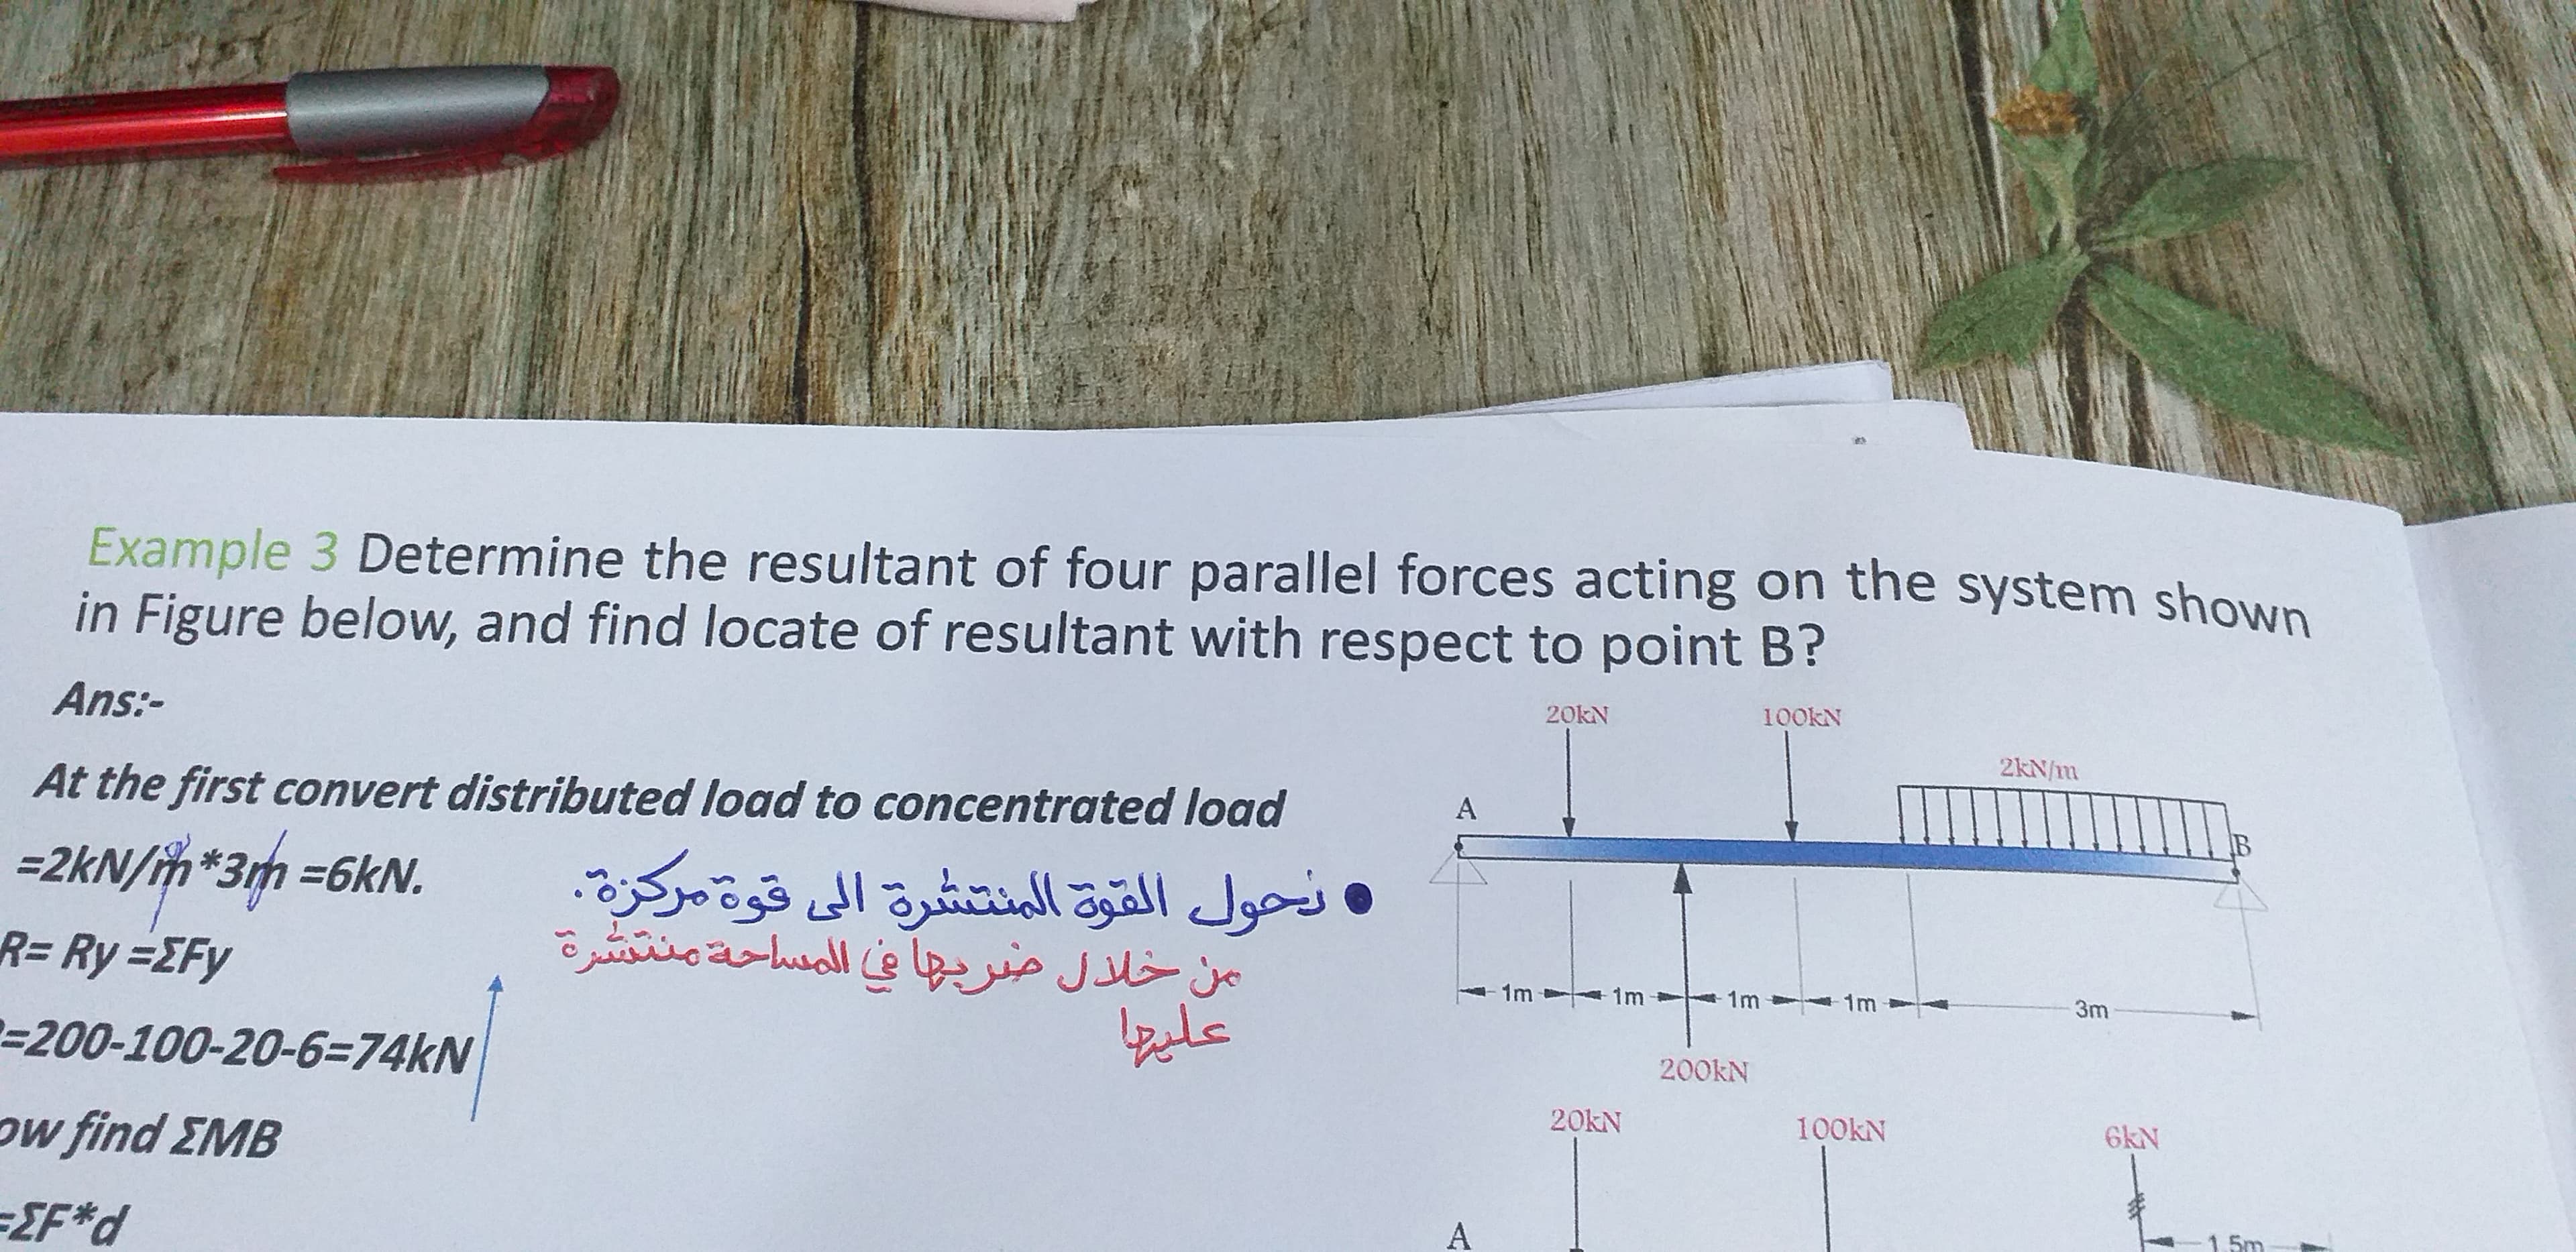 Example 3 Determine the resultant of four parallel forces acting on the system shown
in Figure below, and find locate of resultant with respect to point B?
20KN
100KN
Ans:-
2kN/m
At the first conuont diatuil
